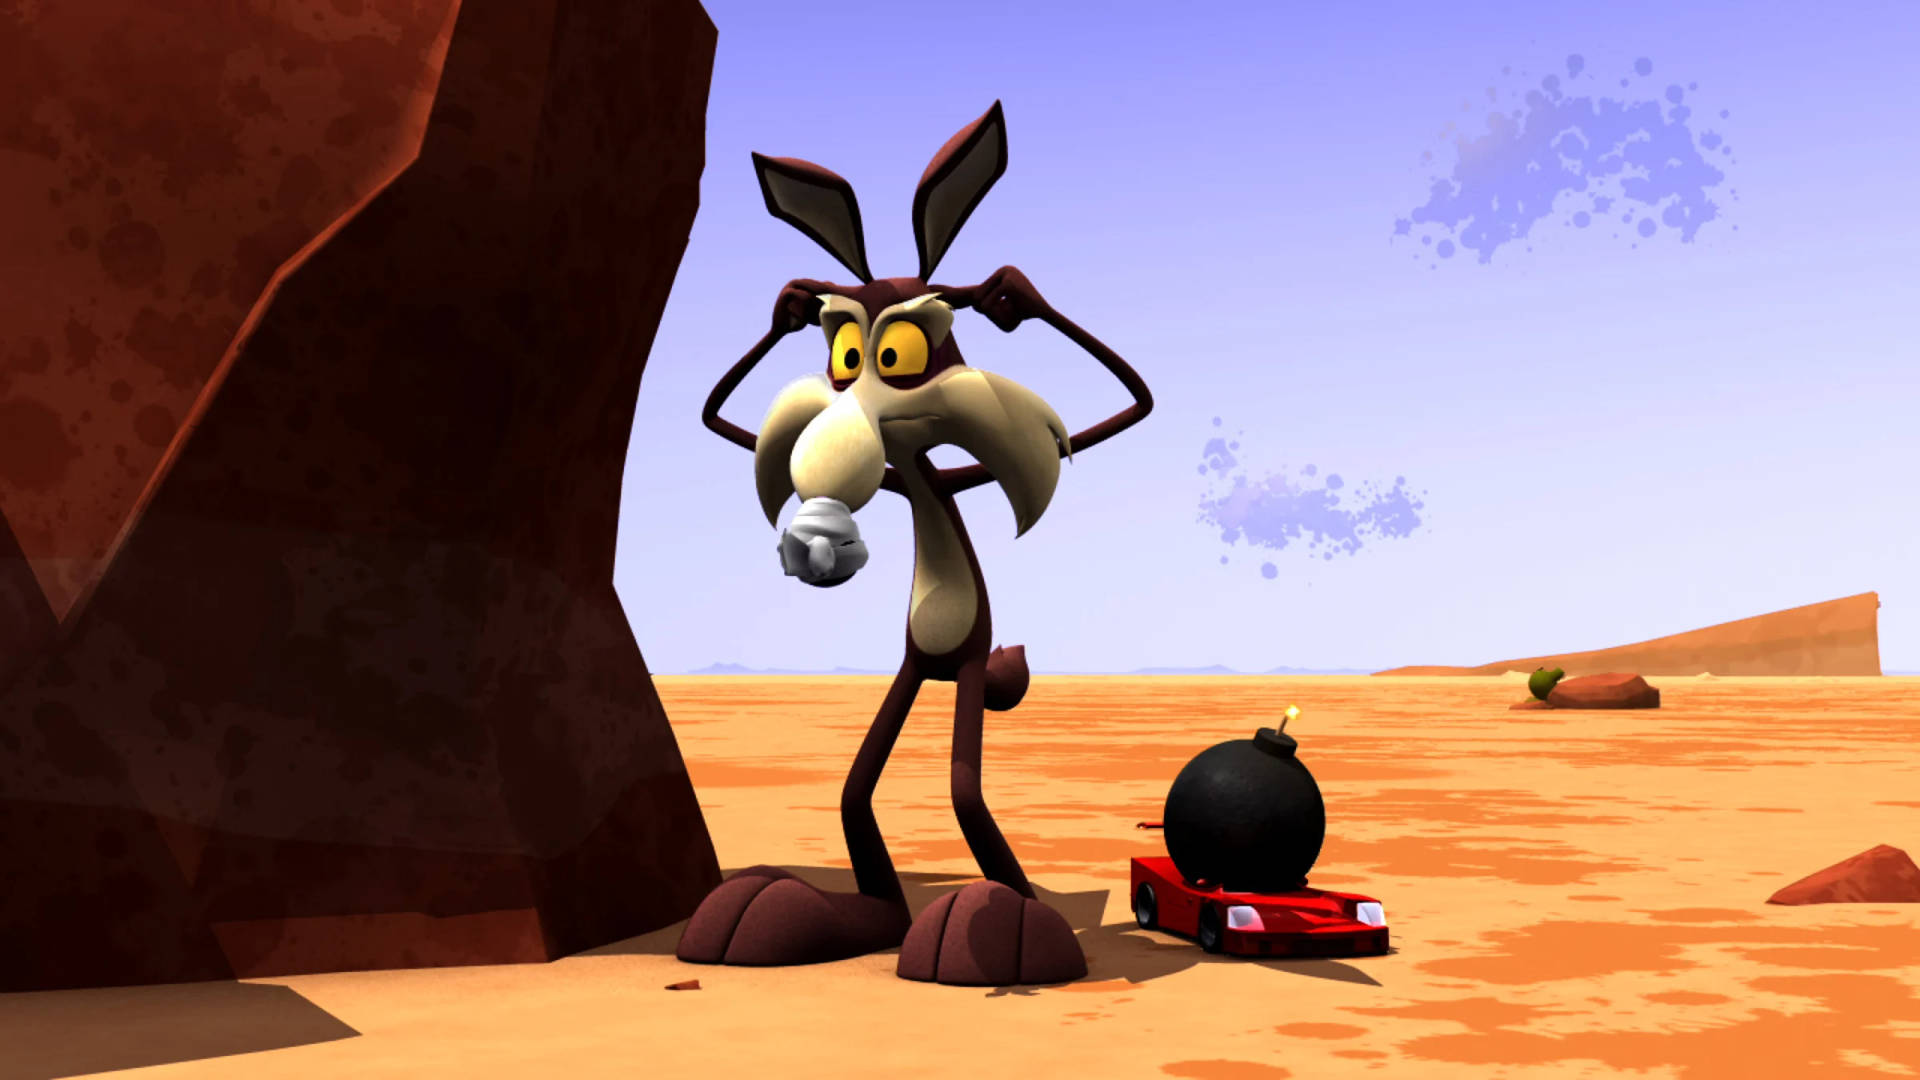 Wile E Coyote With Bomb